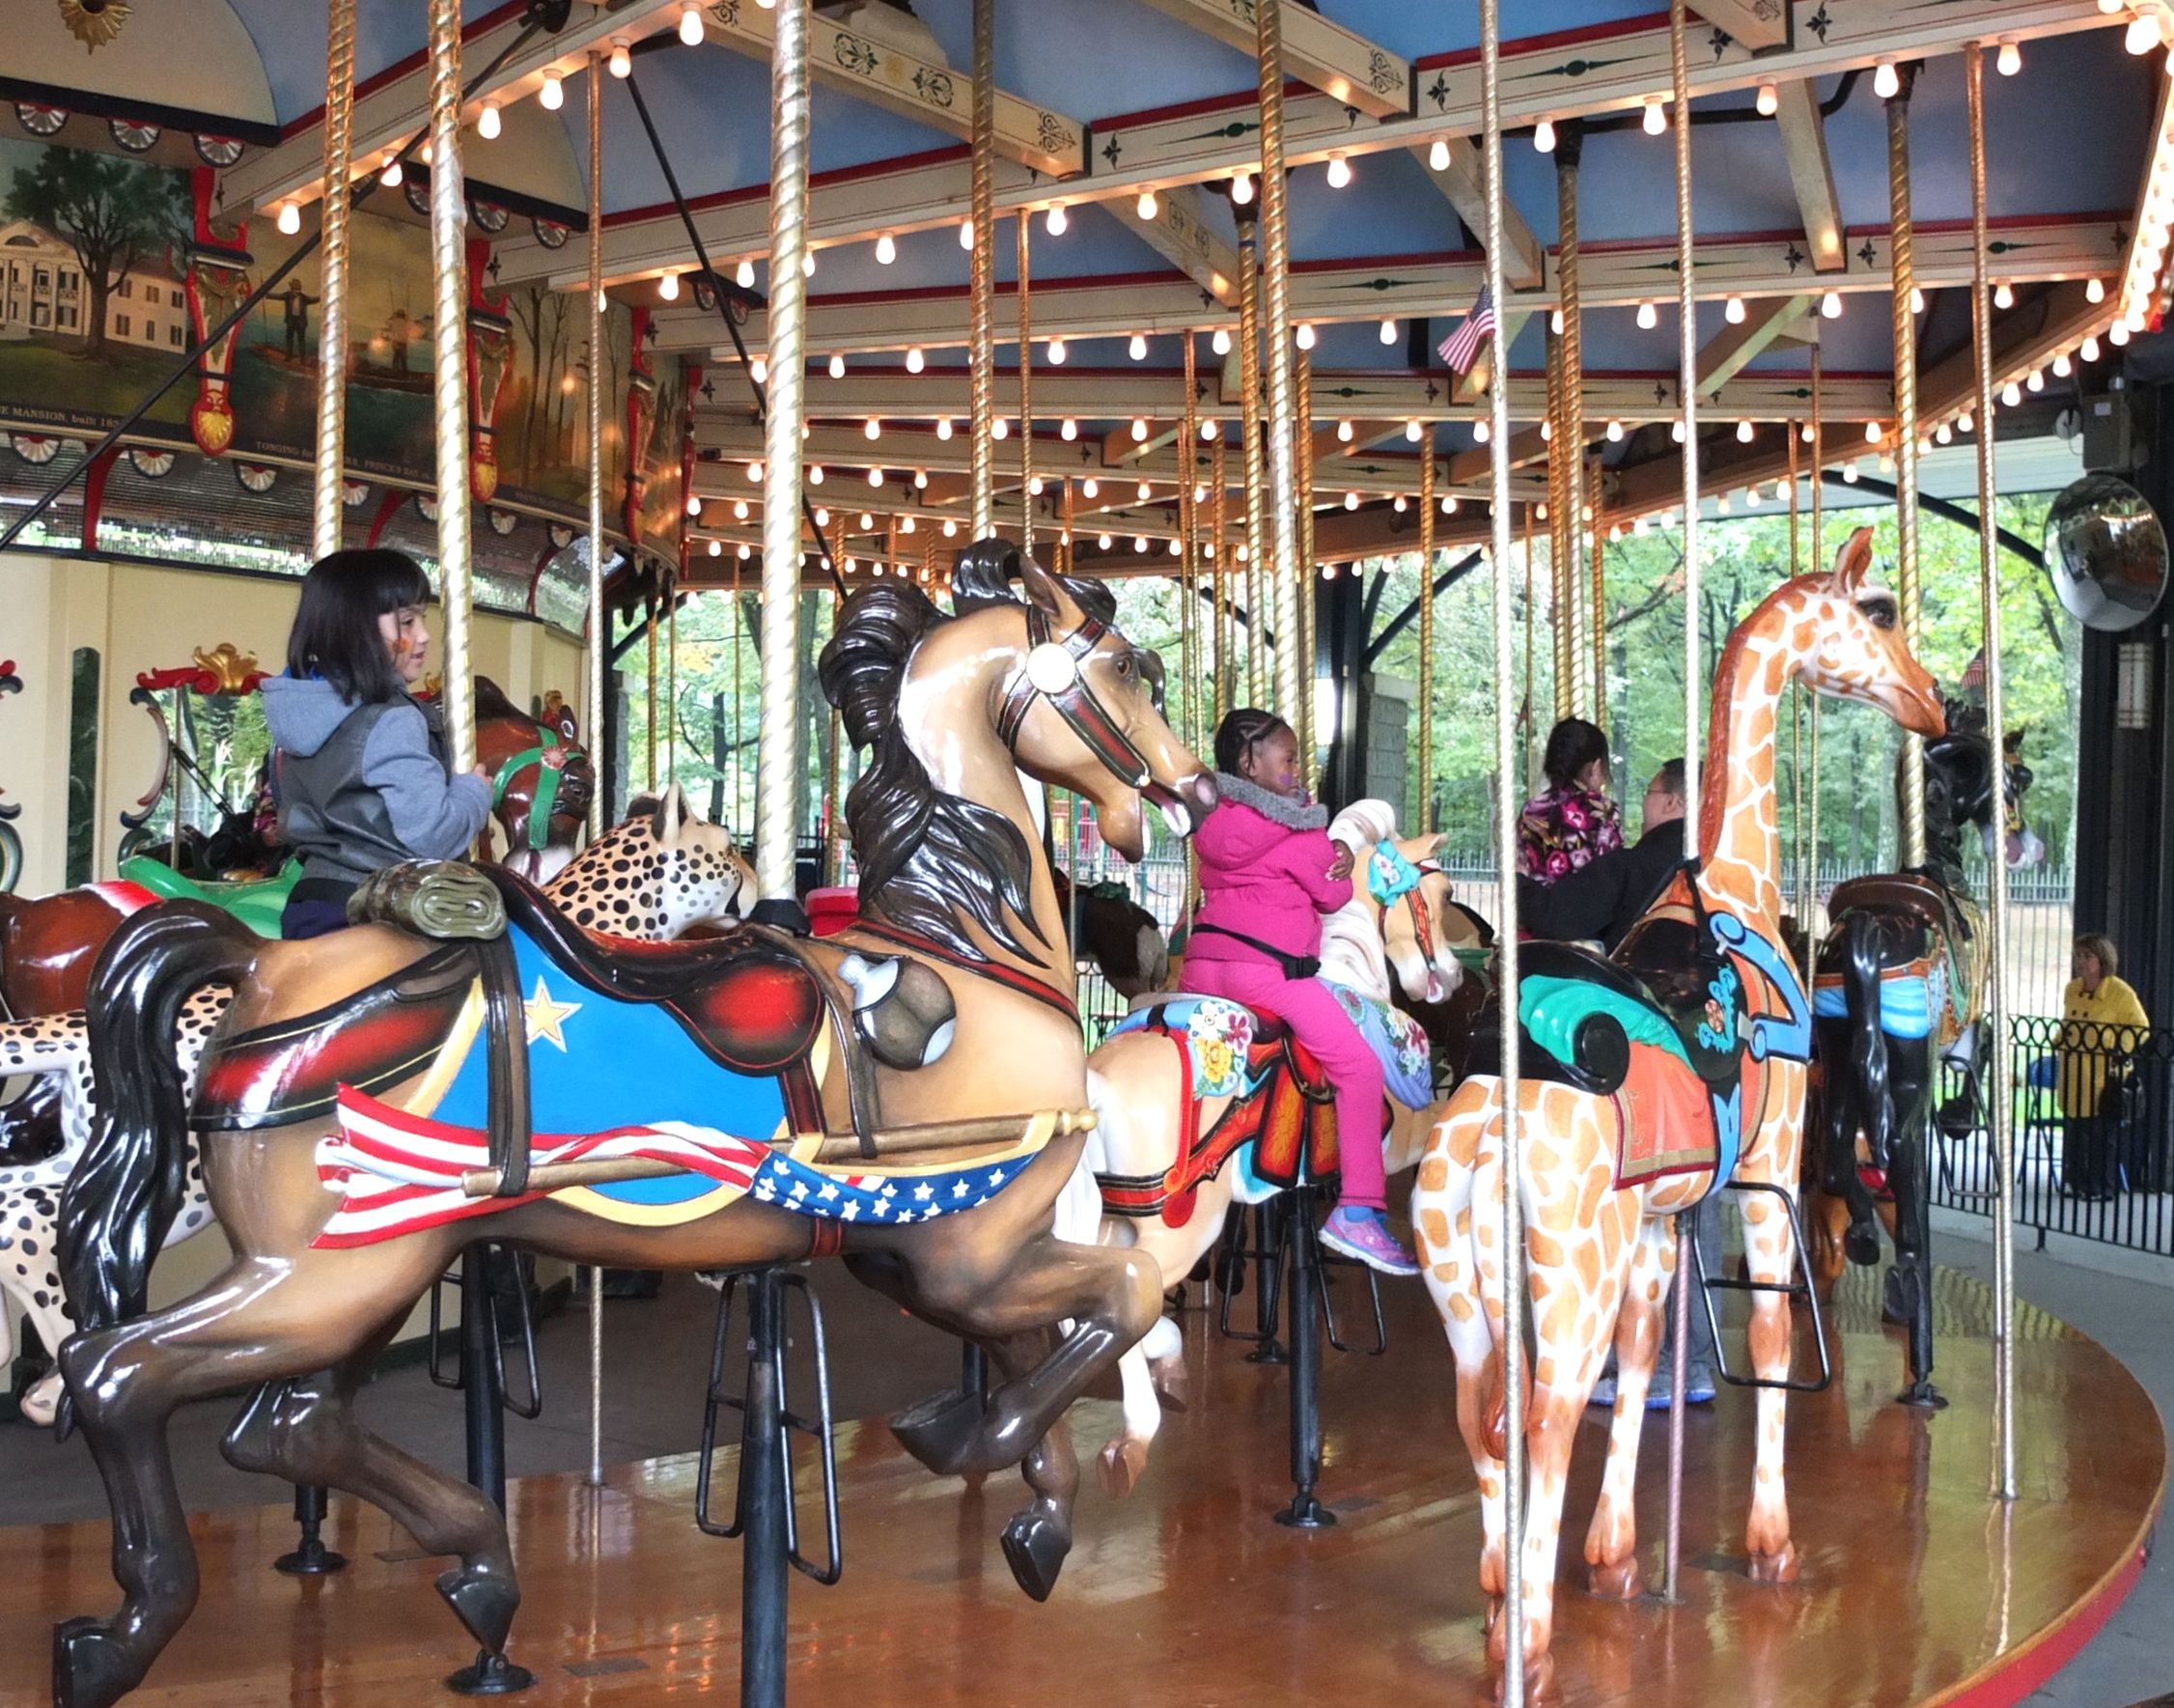 The Carousel For All Children in Willowbrook Park has 51 hand-carved ...